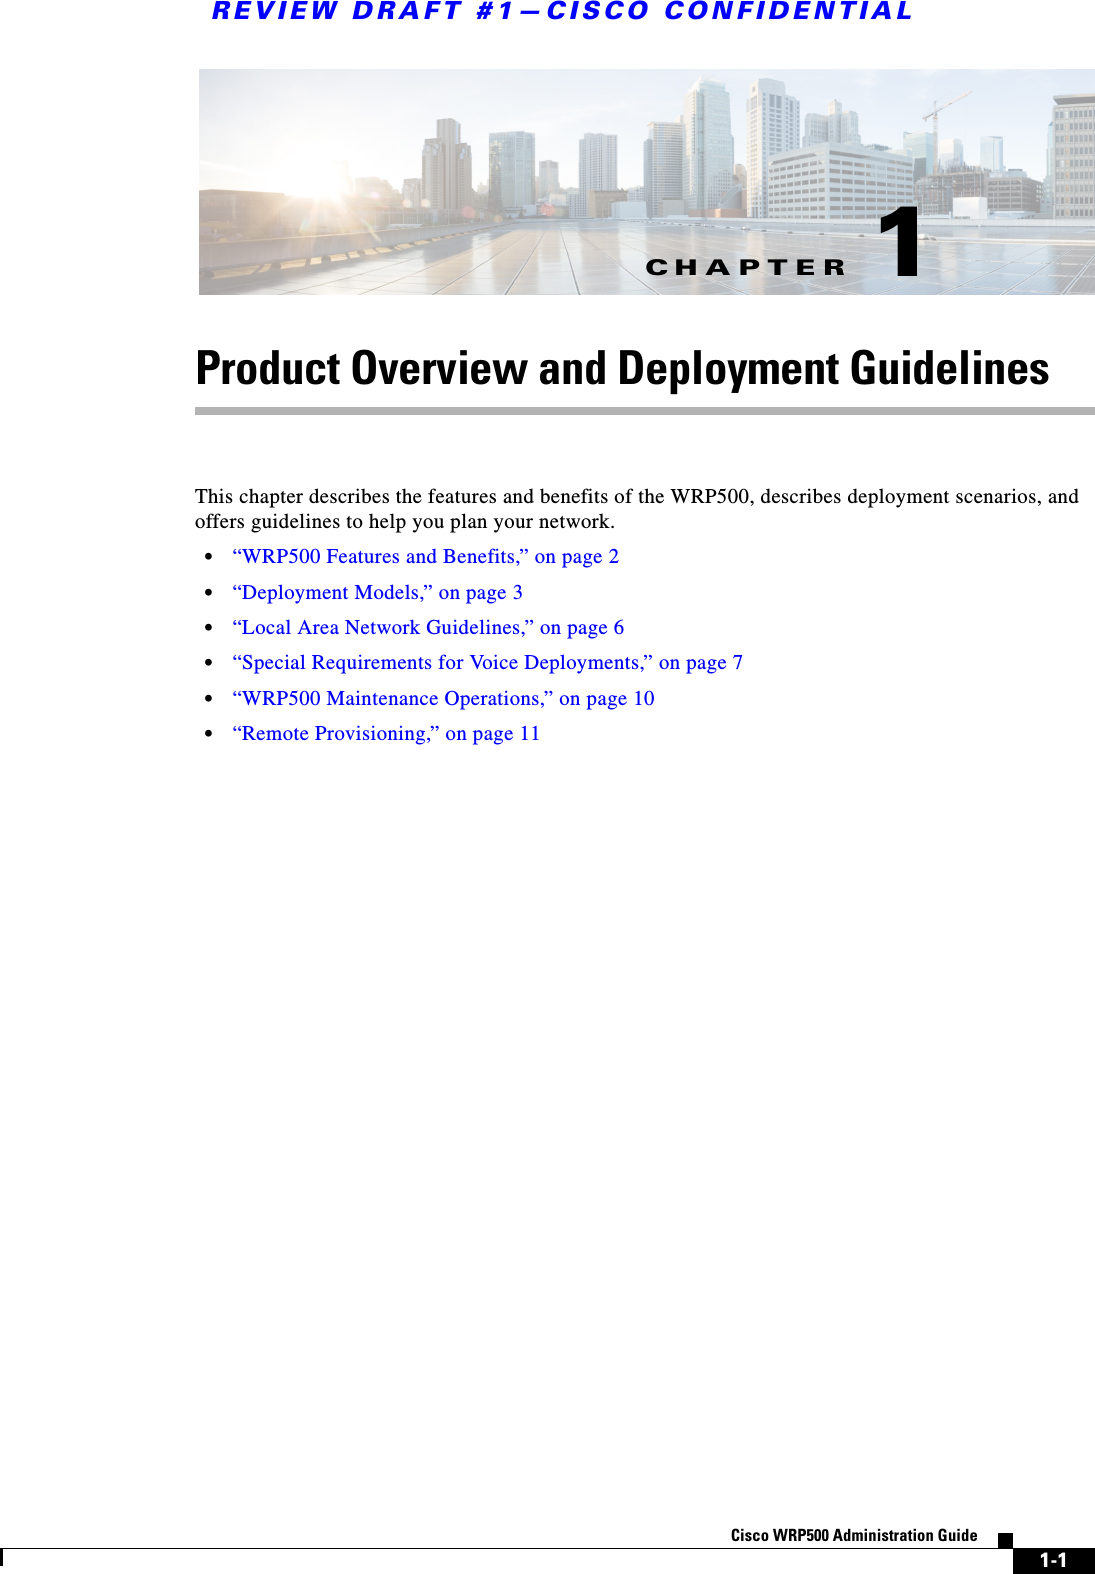 CHAPTERREVIEW DRAFT #1—CISCO CONFIDENTIAL1-1Cisco WRP500 Administration Guide 1Product Overview and Deployment GuidelinesThis chapter describes the features and benefits of the WRP500, describes deployment scenarios, and offers guidelines to help you plan your network.•“WRP500 Features and Benefits,” on page 2•“Deployment Models,” on page 3•“Local Area Network Guidelines,” on page 6•“Special Requirements for Voice Deployments,” on page 7•“WRP500 Maintenance Operations,” on page 10•“Remote Provisioning,” on page 11